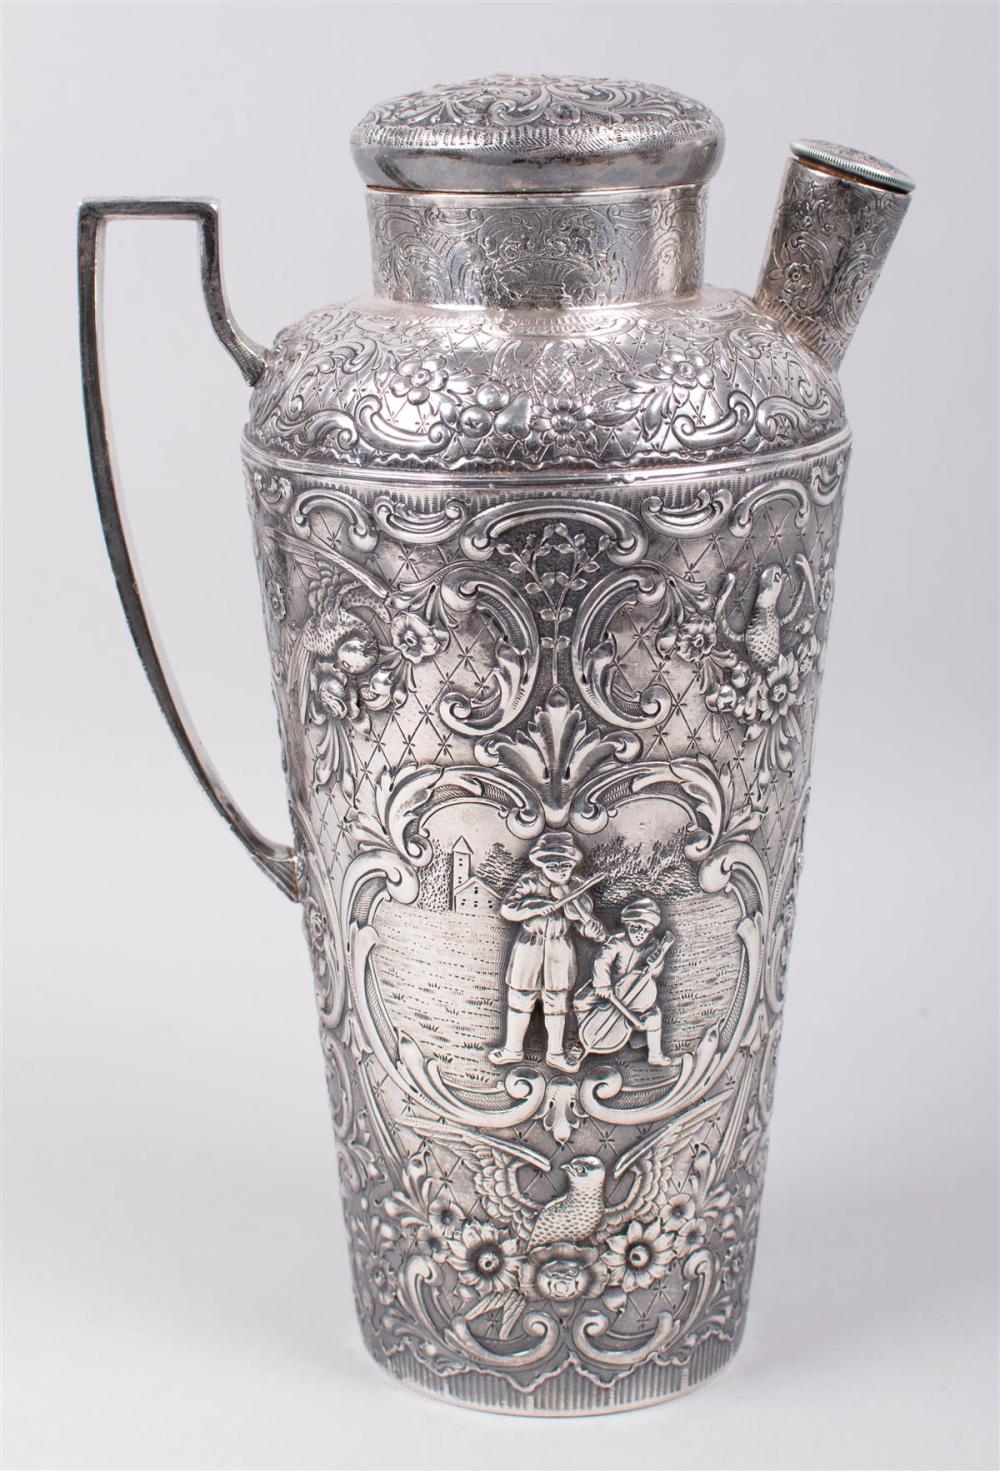 SILVERPLATED REPOUSSE COCKTAIL